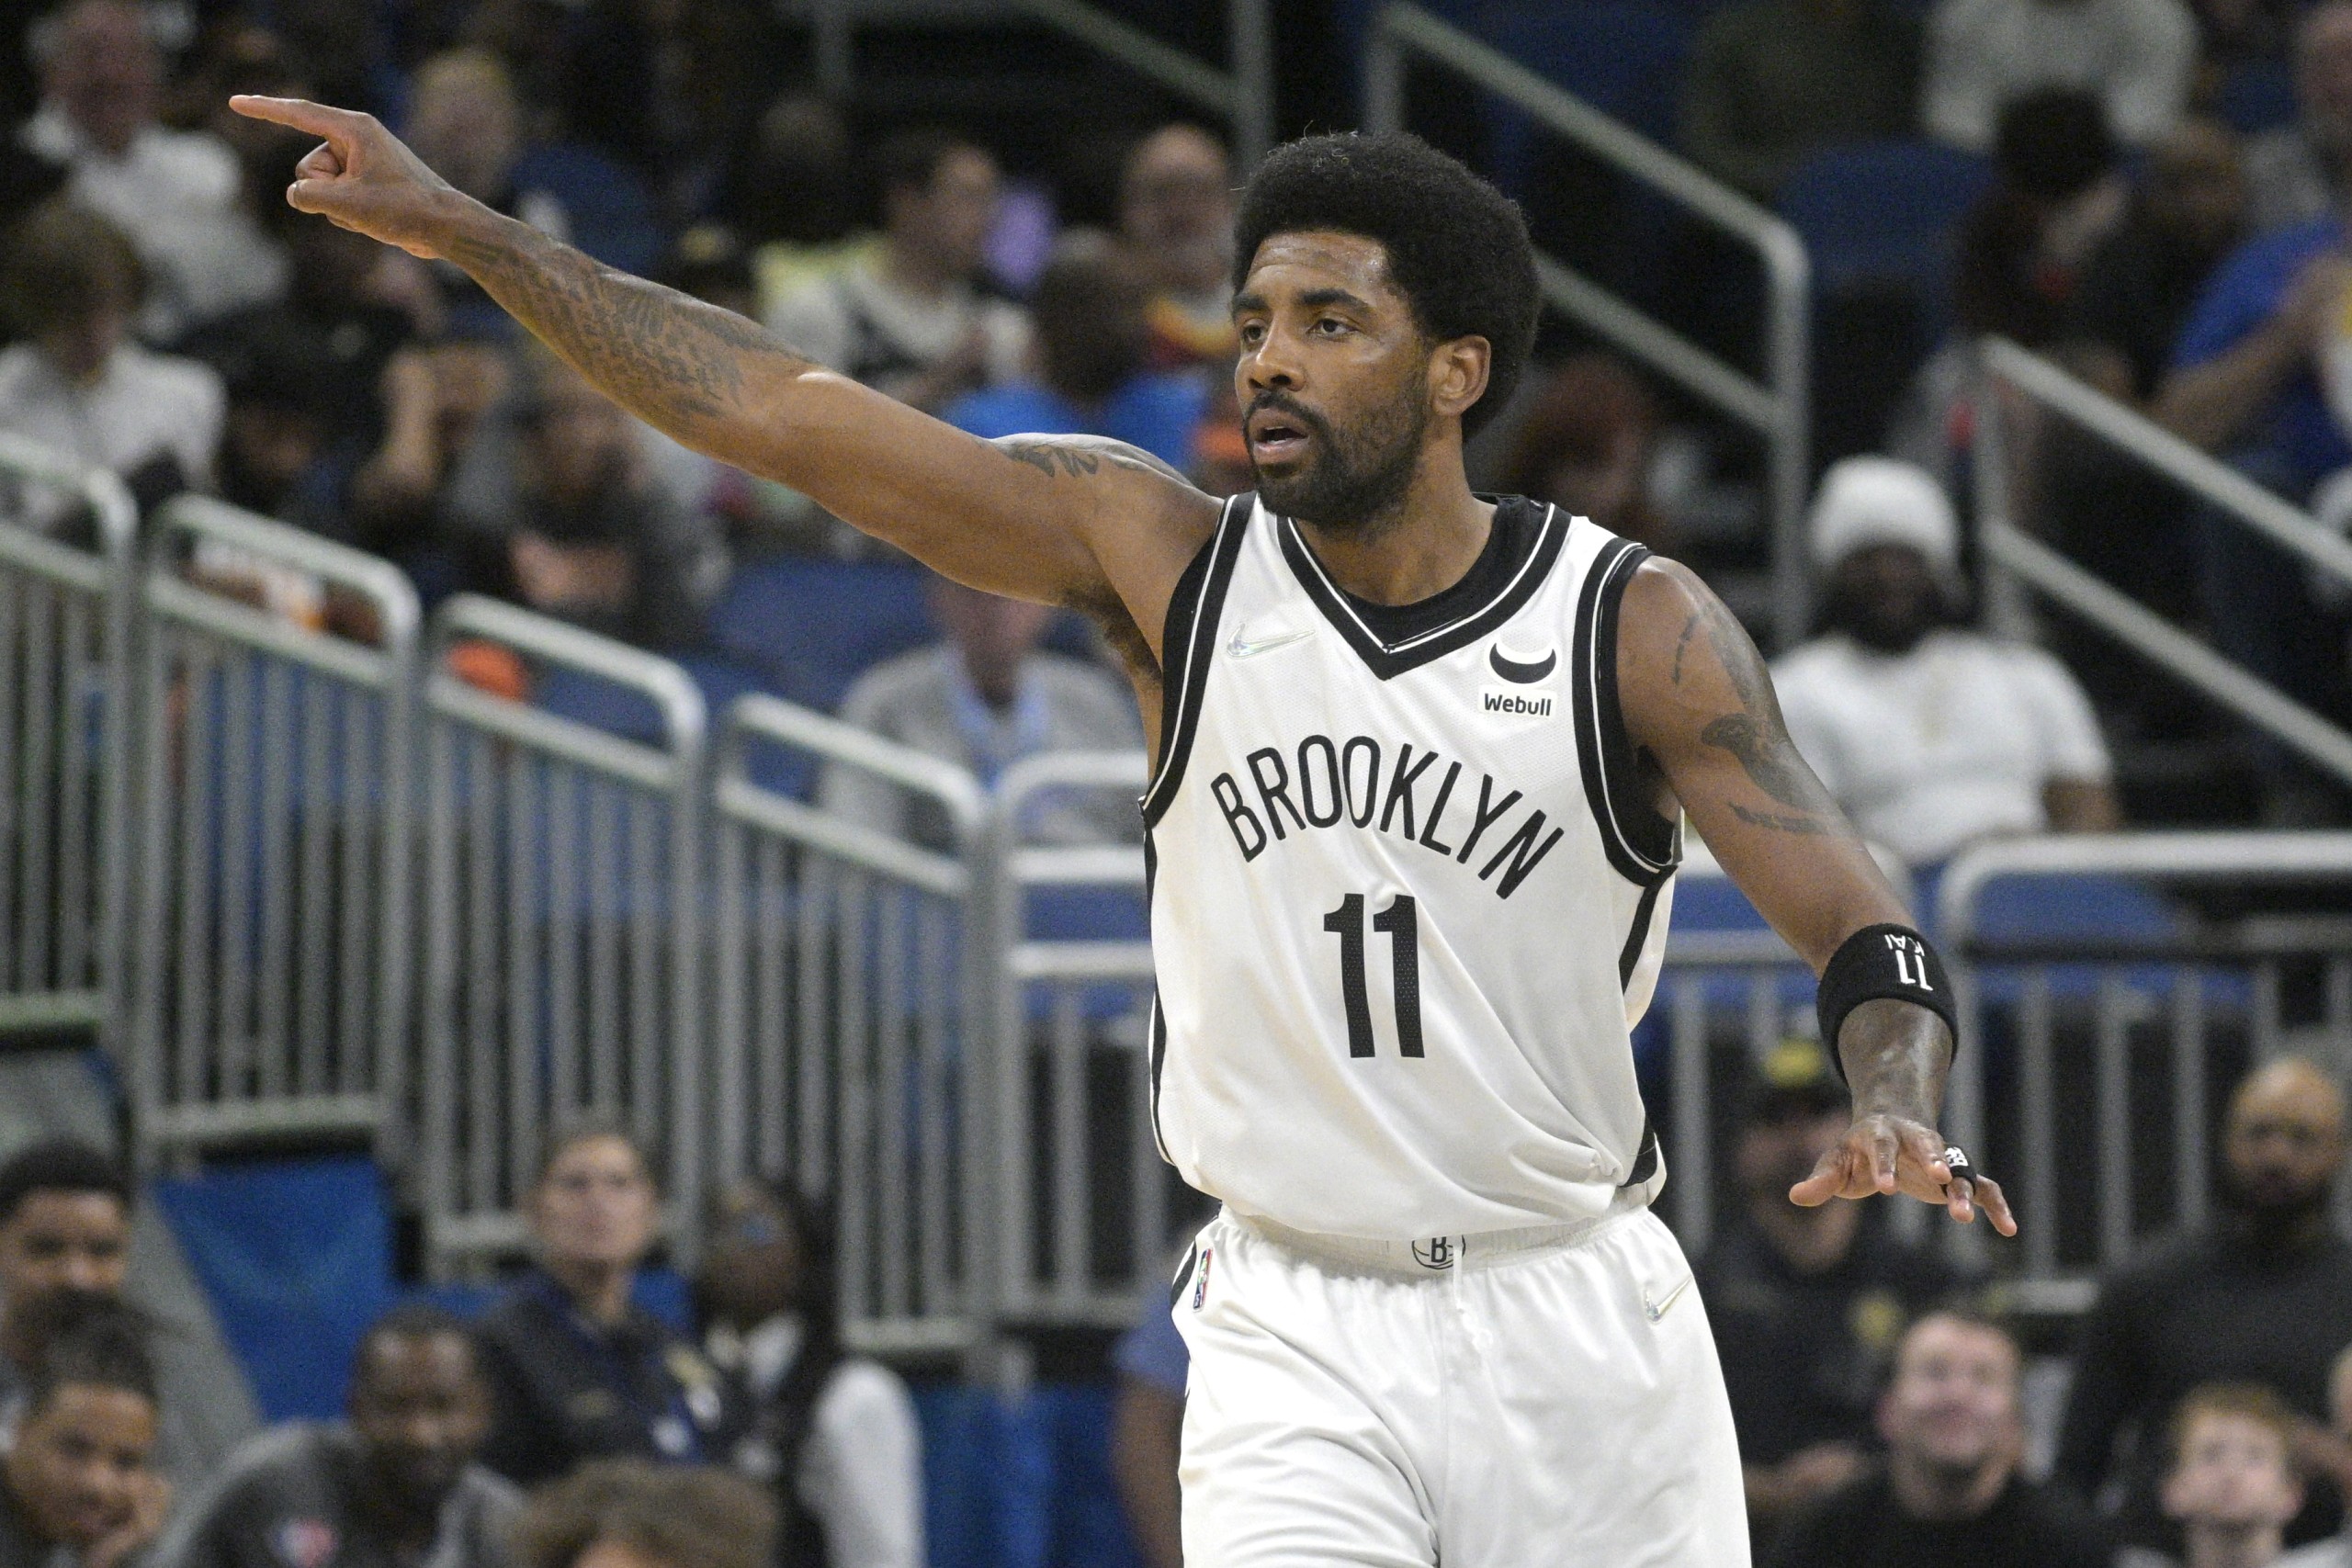 Brooklyn Nets guard Kyrie Irving (11) acknowledges a teammate after scoring a 3-pointer during the first half of an NBA basketball game against the Orlando Magic, Tuesday, March 15, 2022, in Orlando, Fla. (AP Photo/Phelan M. Ebenhack)